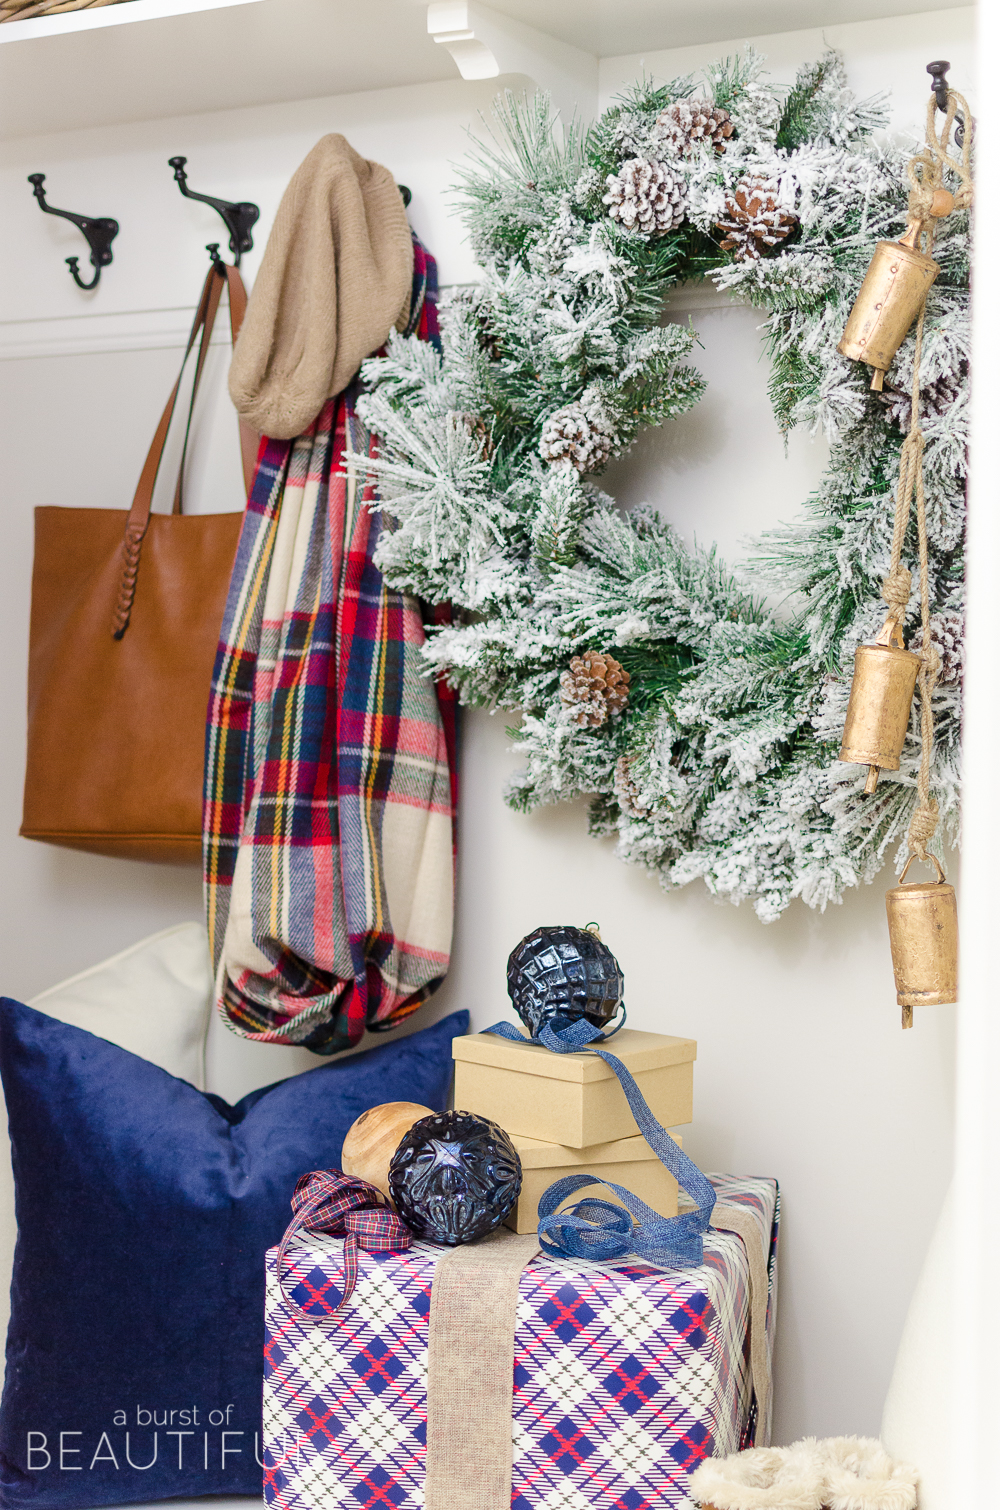 A simple Christmas entryway receives a dose of holiday charm with a flocked wreath, velvet pillows and packages wrapped in festive Christmas paper. 